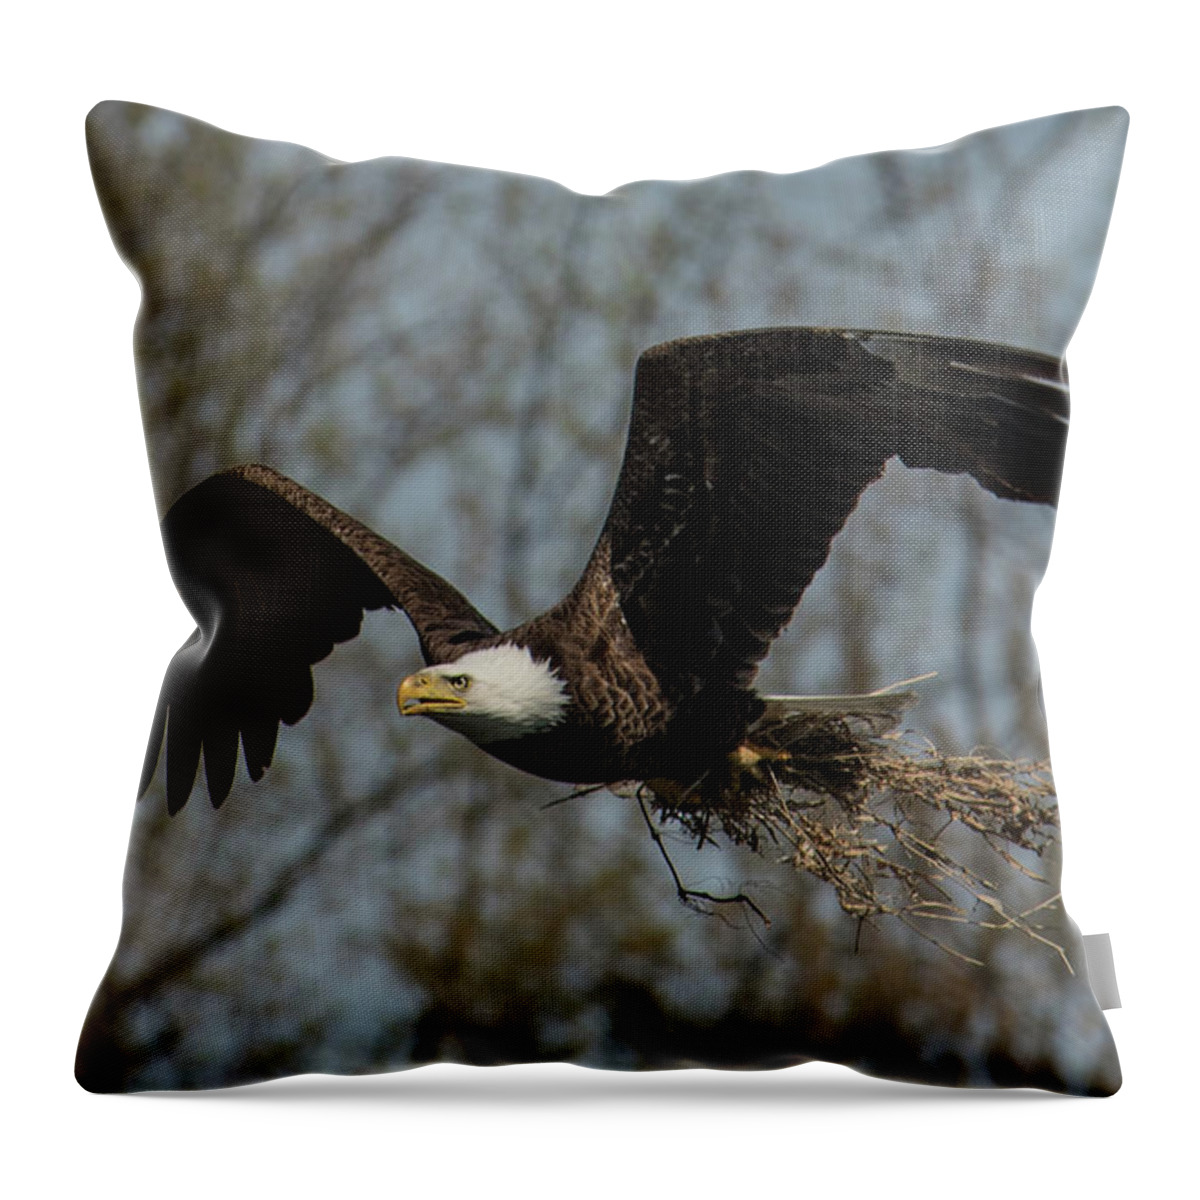 America Throw Pillow featuring the photograph Eagle Nest Material by Michael Hall